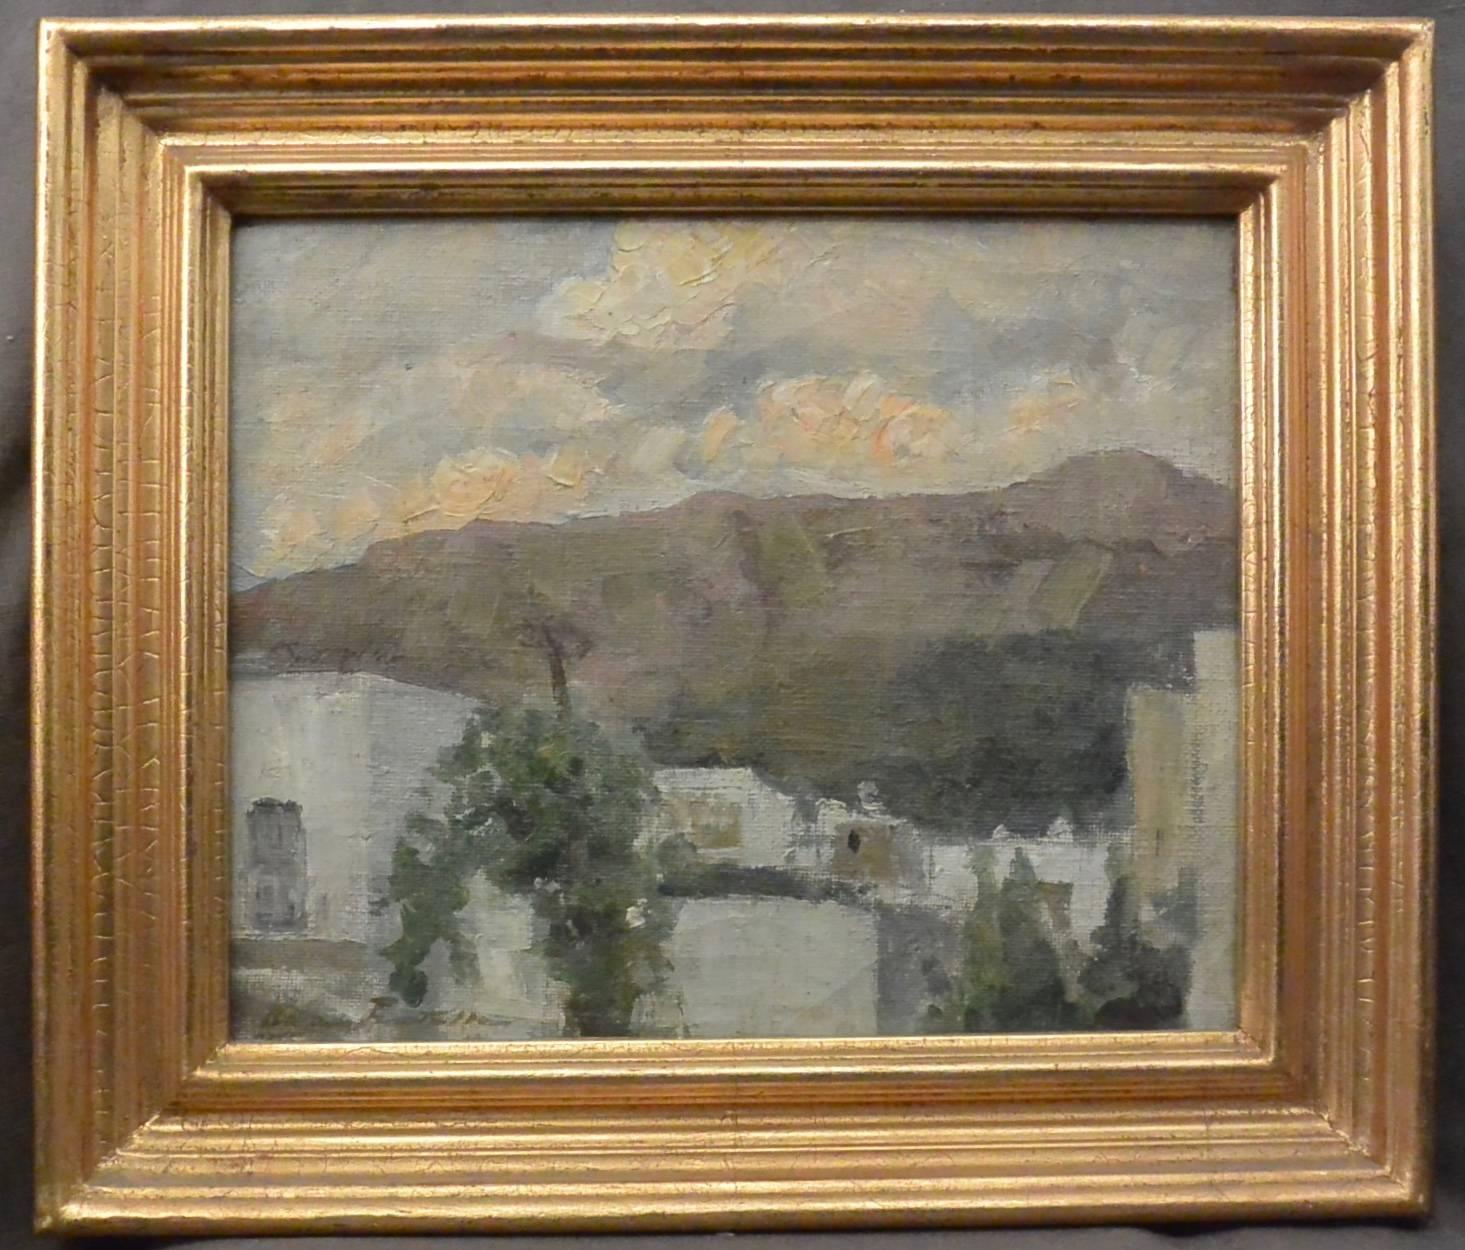 Ada Pratella (1901-1929) Houses at Capri, oil on canvas in gold frame, signed lower left. Italy, circa 1920
Dimensions: 17